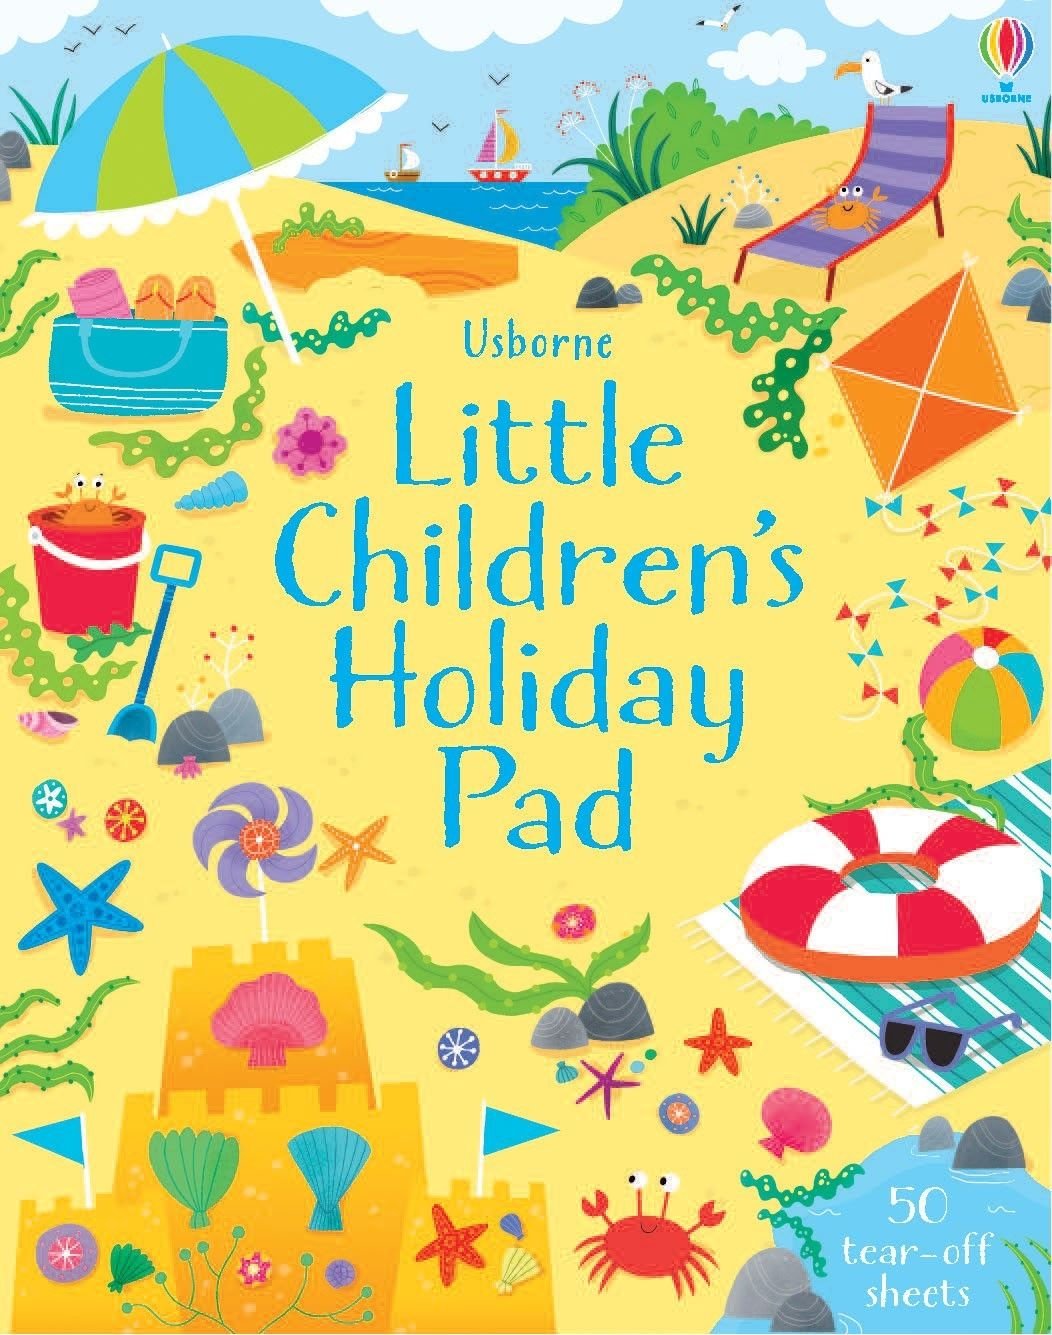 holiday pad - Little children's